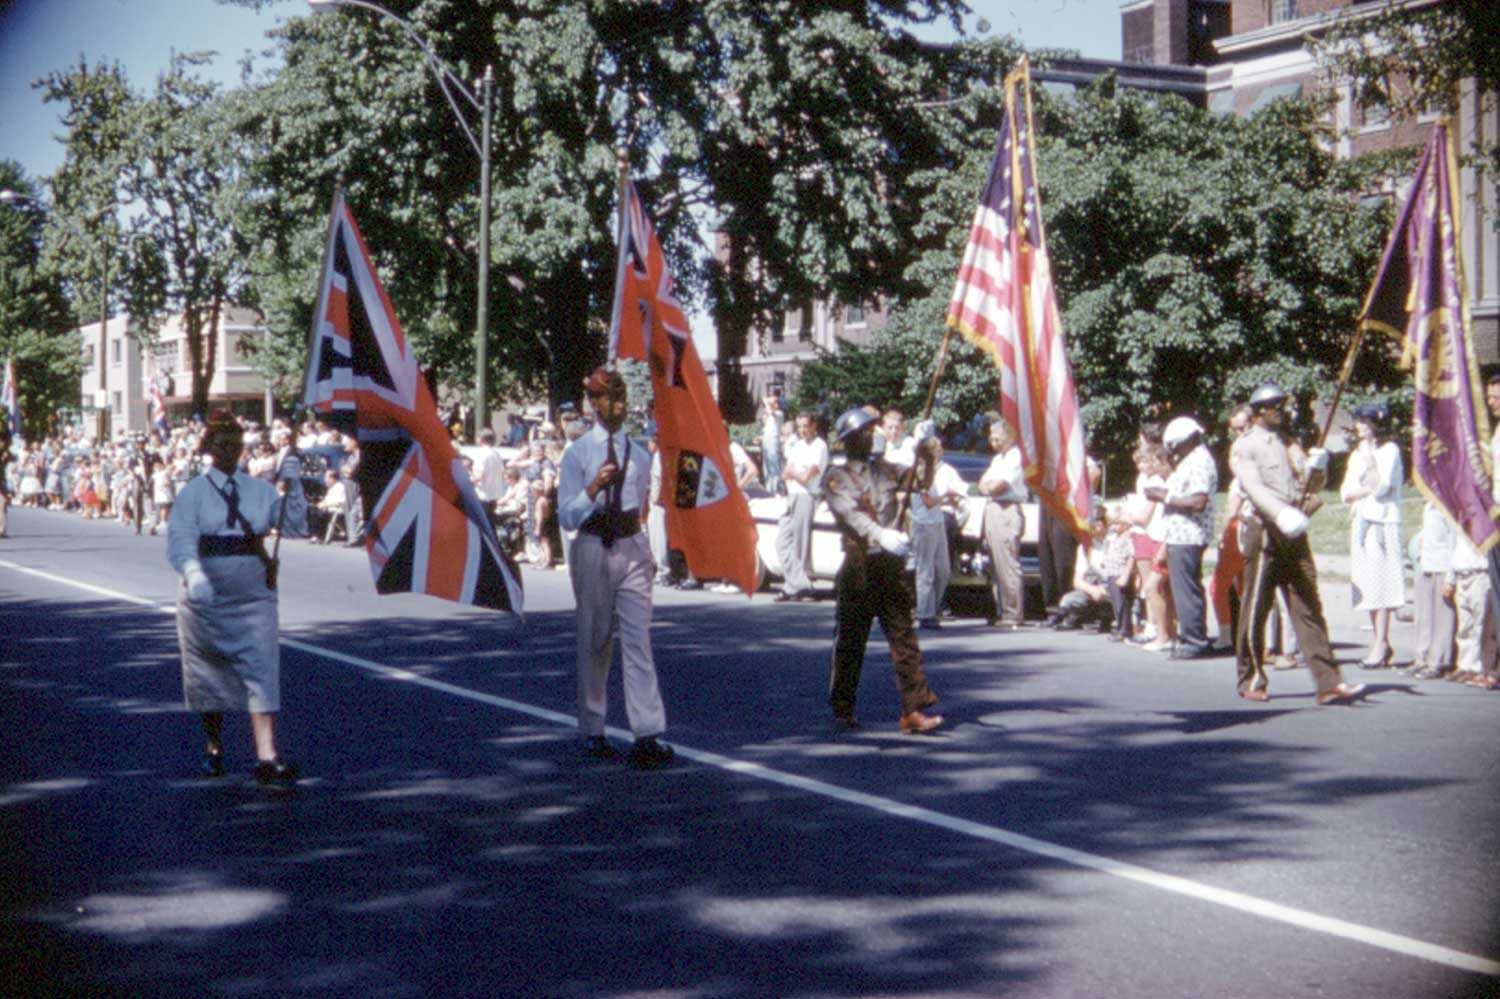 Emancipation parade in Windsor, August 1952 (Photo © Archives of Ontario)